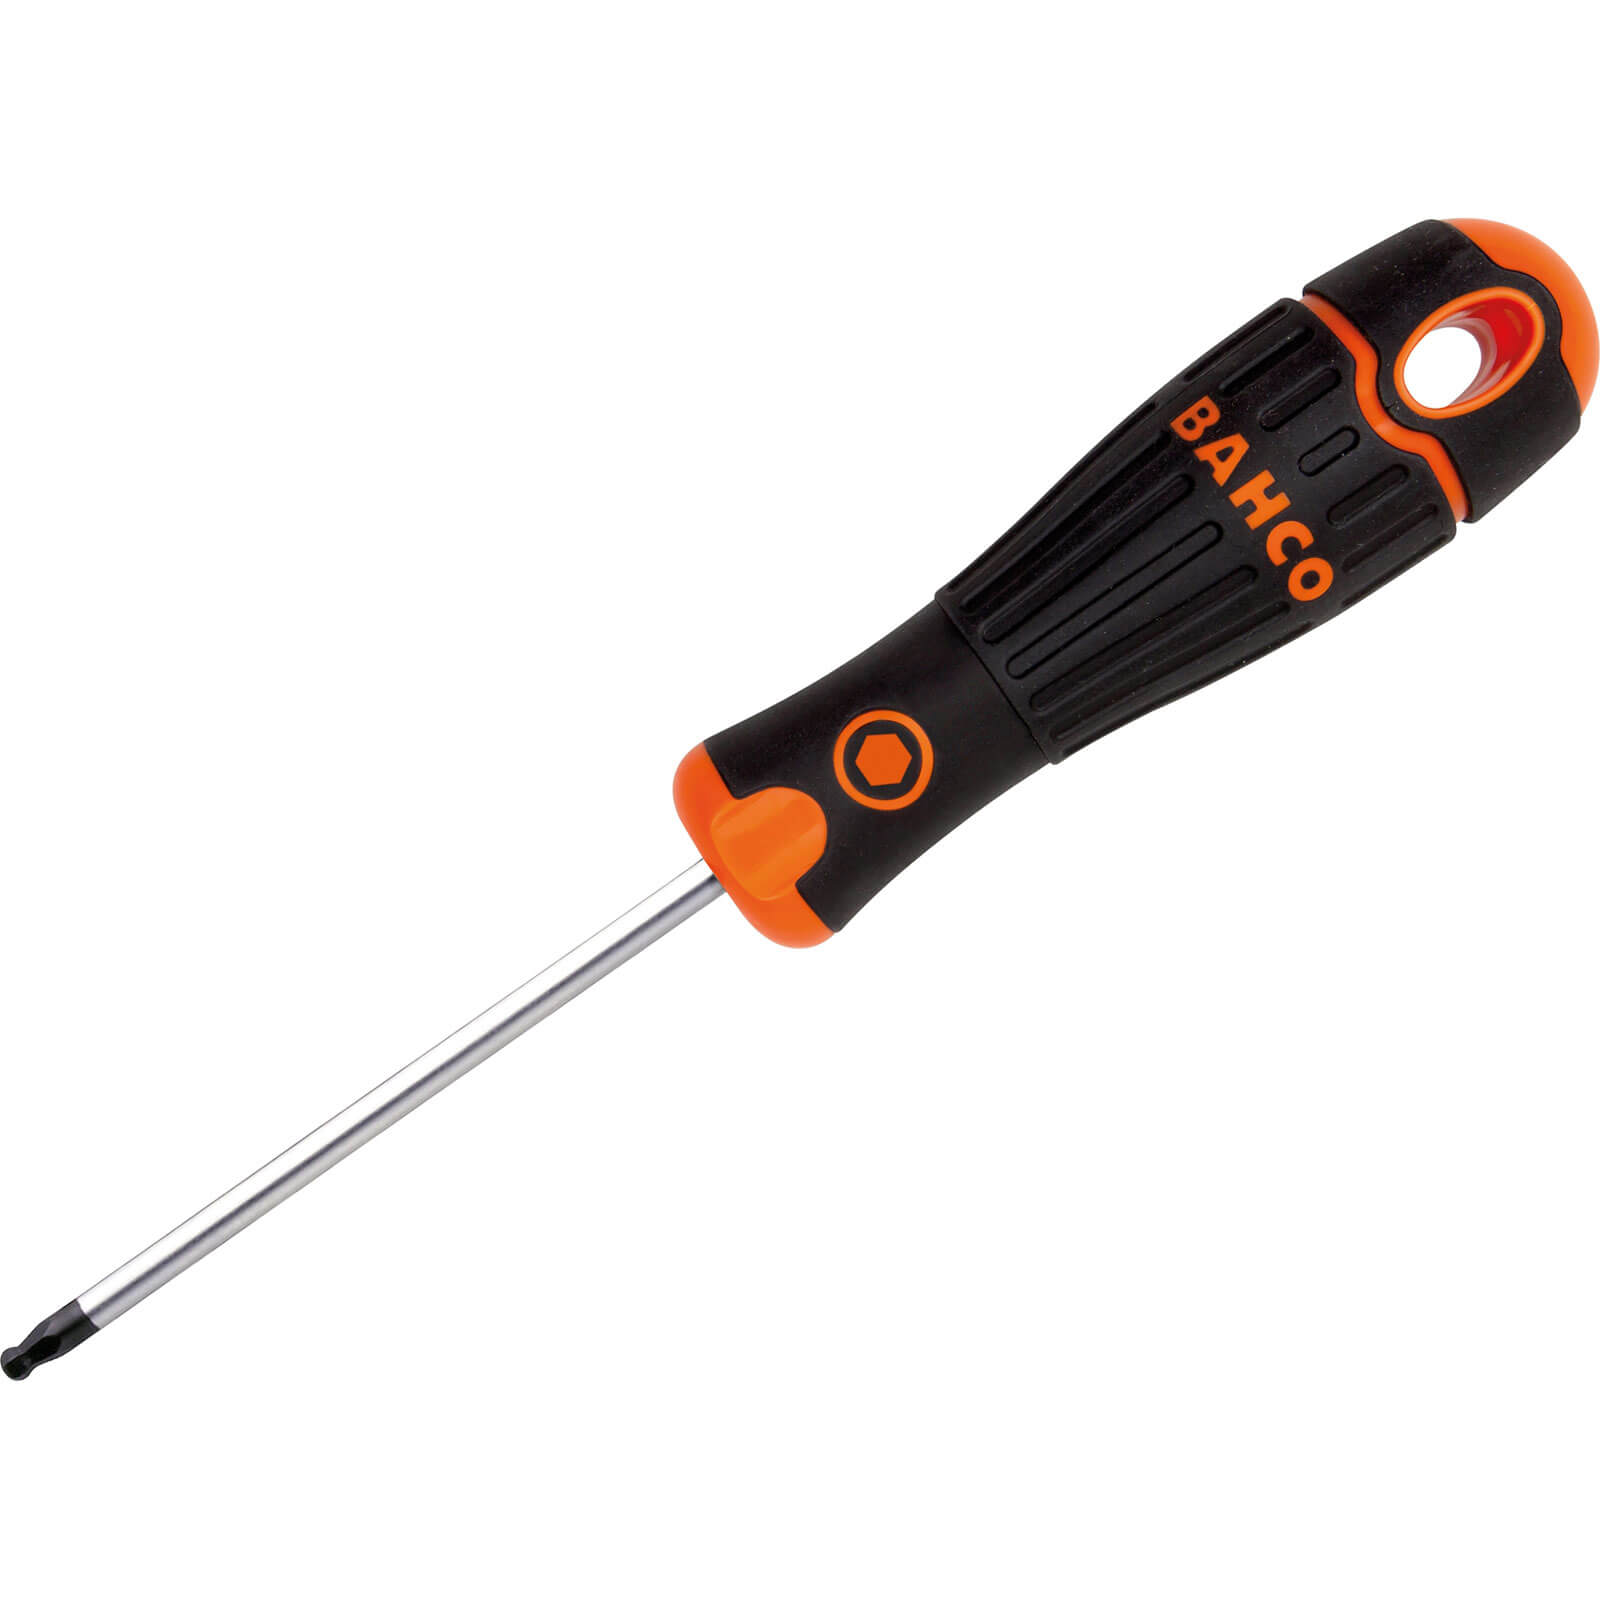 Photo of Bahco Ball End Hexagon Screwdriver 5mm 100mm